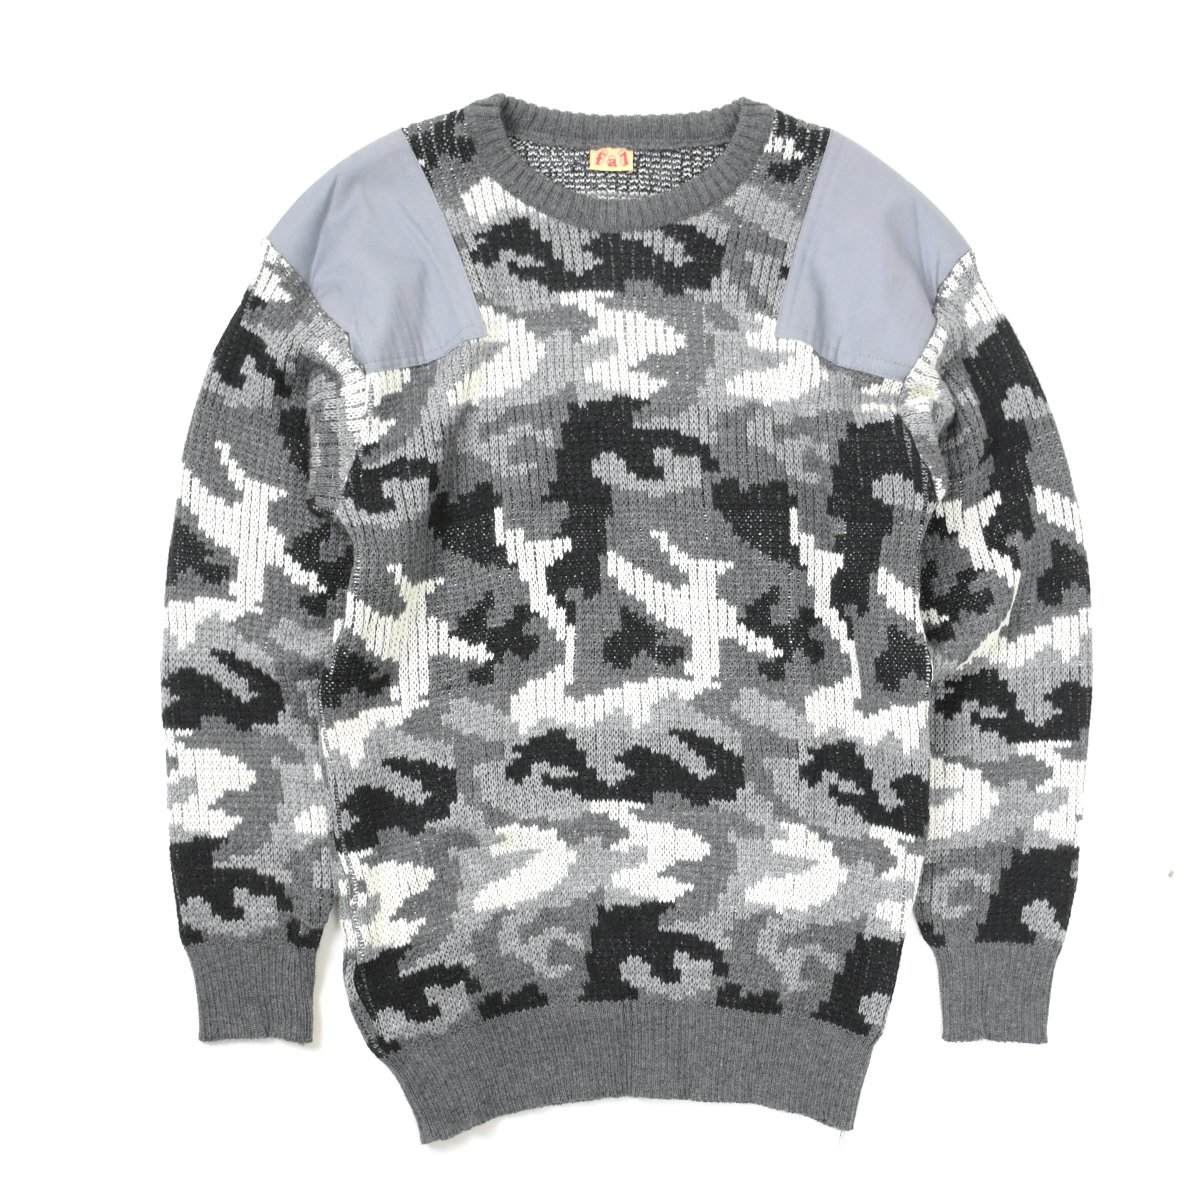 <img class='new_mark_img1' src='https://img.shop-pro.jp/img/new/icons23.gif' style='border:none;display:inline;margin:0px;padding:0px;width:auto;' />【DEAD STOCK】Itlian Army Metropolitan Sweater (Urban Camo)
                          </a>
            <span class=